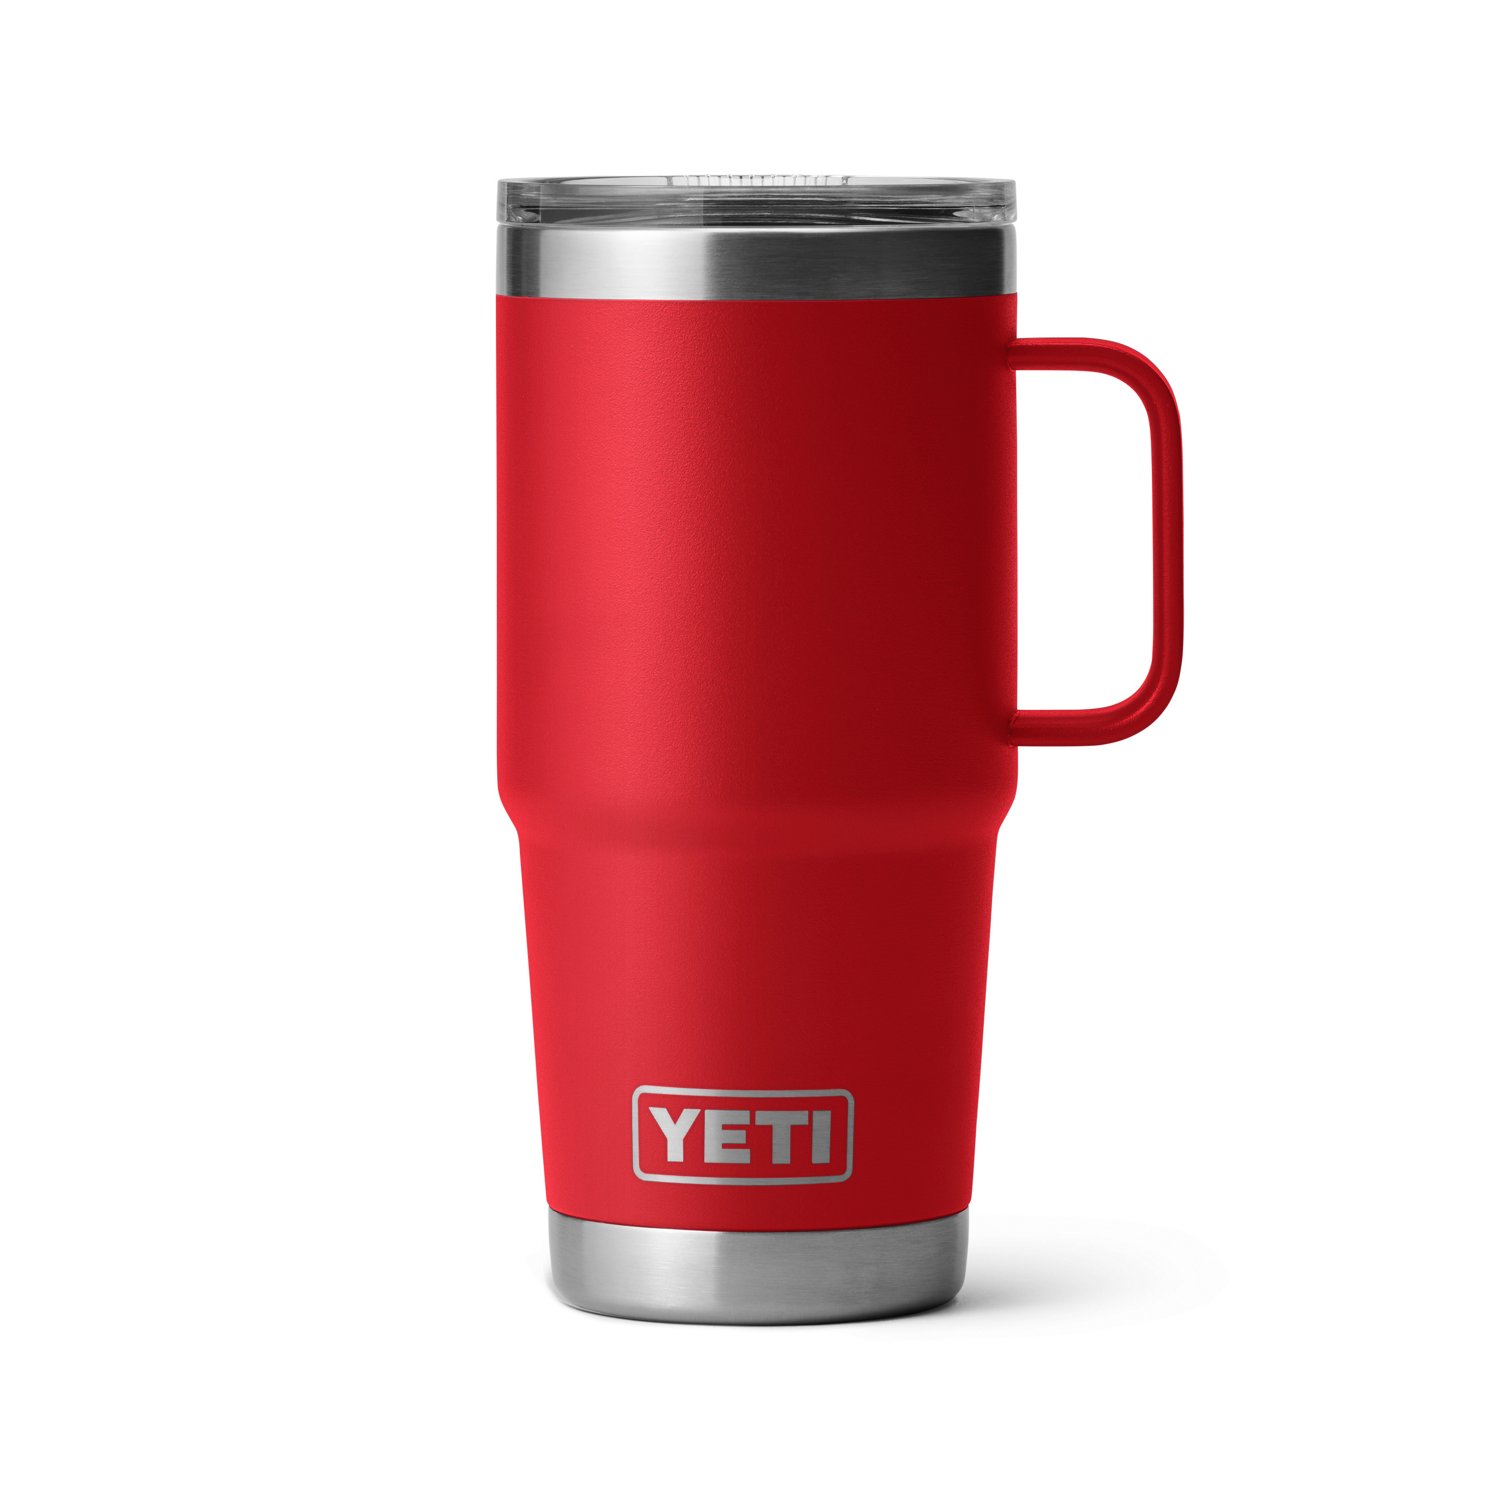 https://academy.scene7.com/is/image/academy//drinkware/yeti-rambler-20-oz-travel-mug-with-stronghold-lid-21071501392-red/og-image/fe4a88bbd8904ed5a1541f1afb486a91